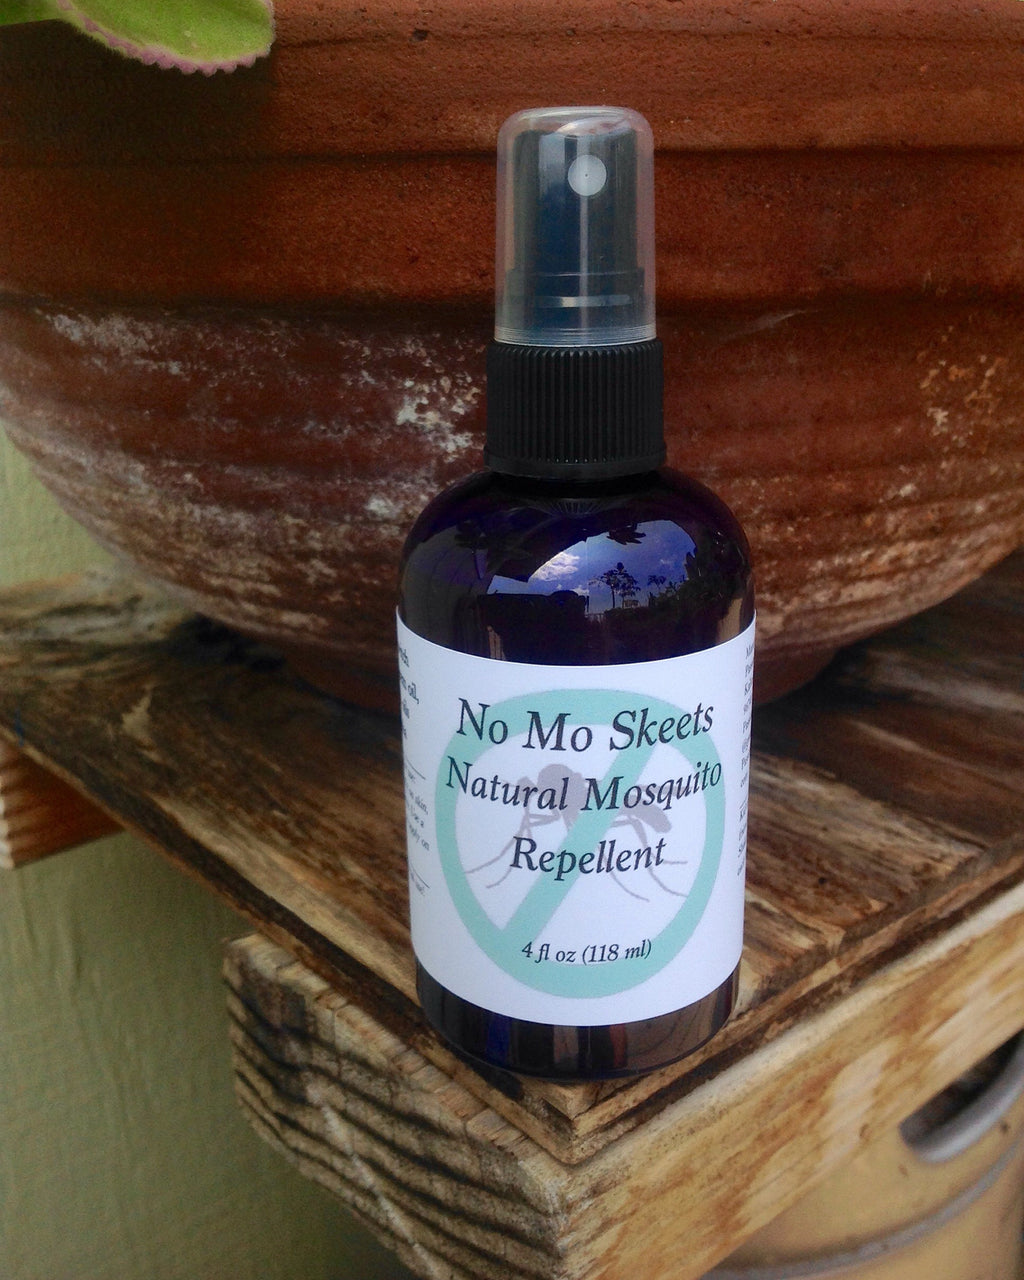 No Mo Skeets Mosquito Repellent - Passion Moon Potions - 2